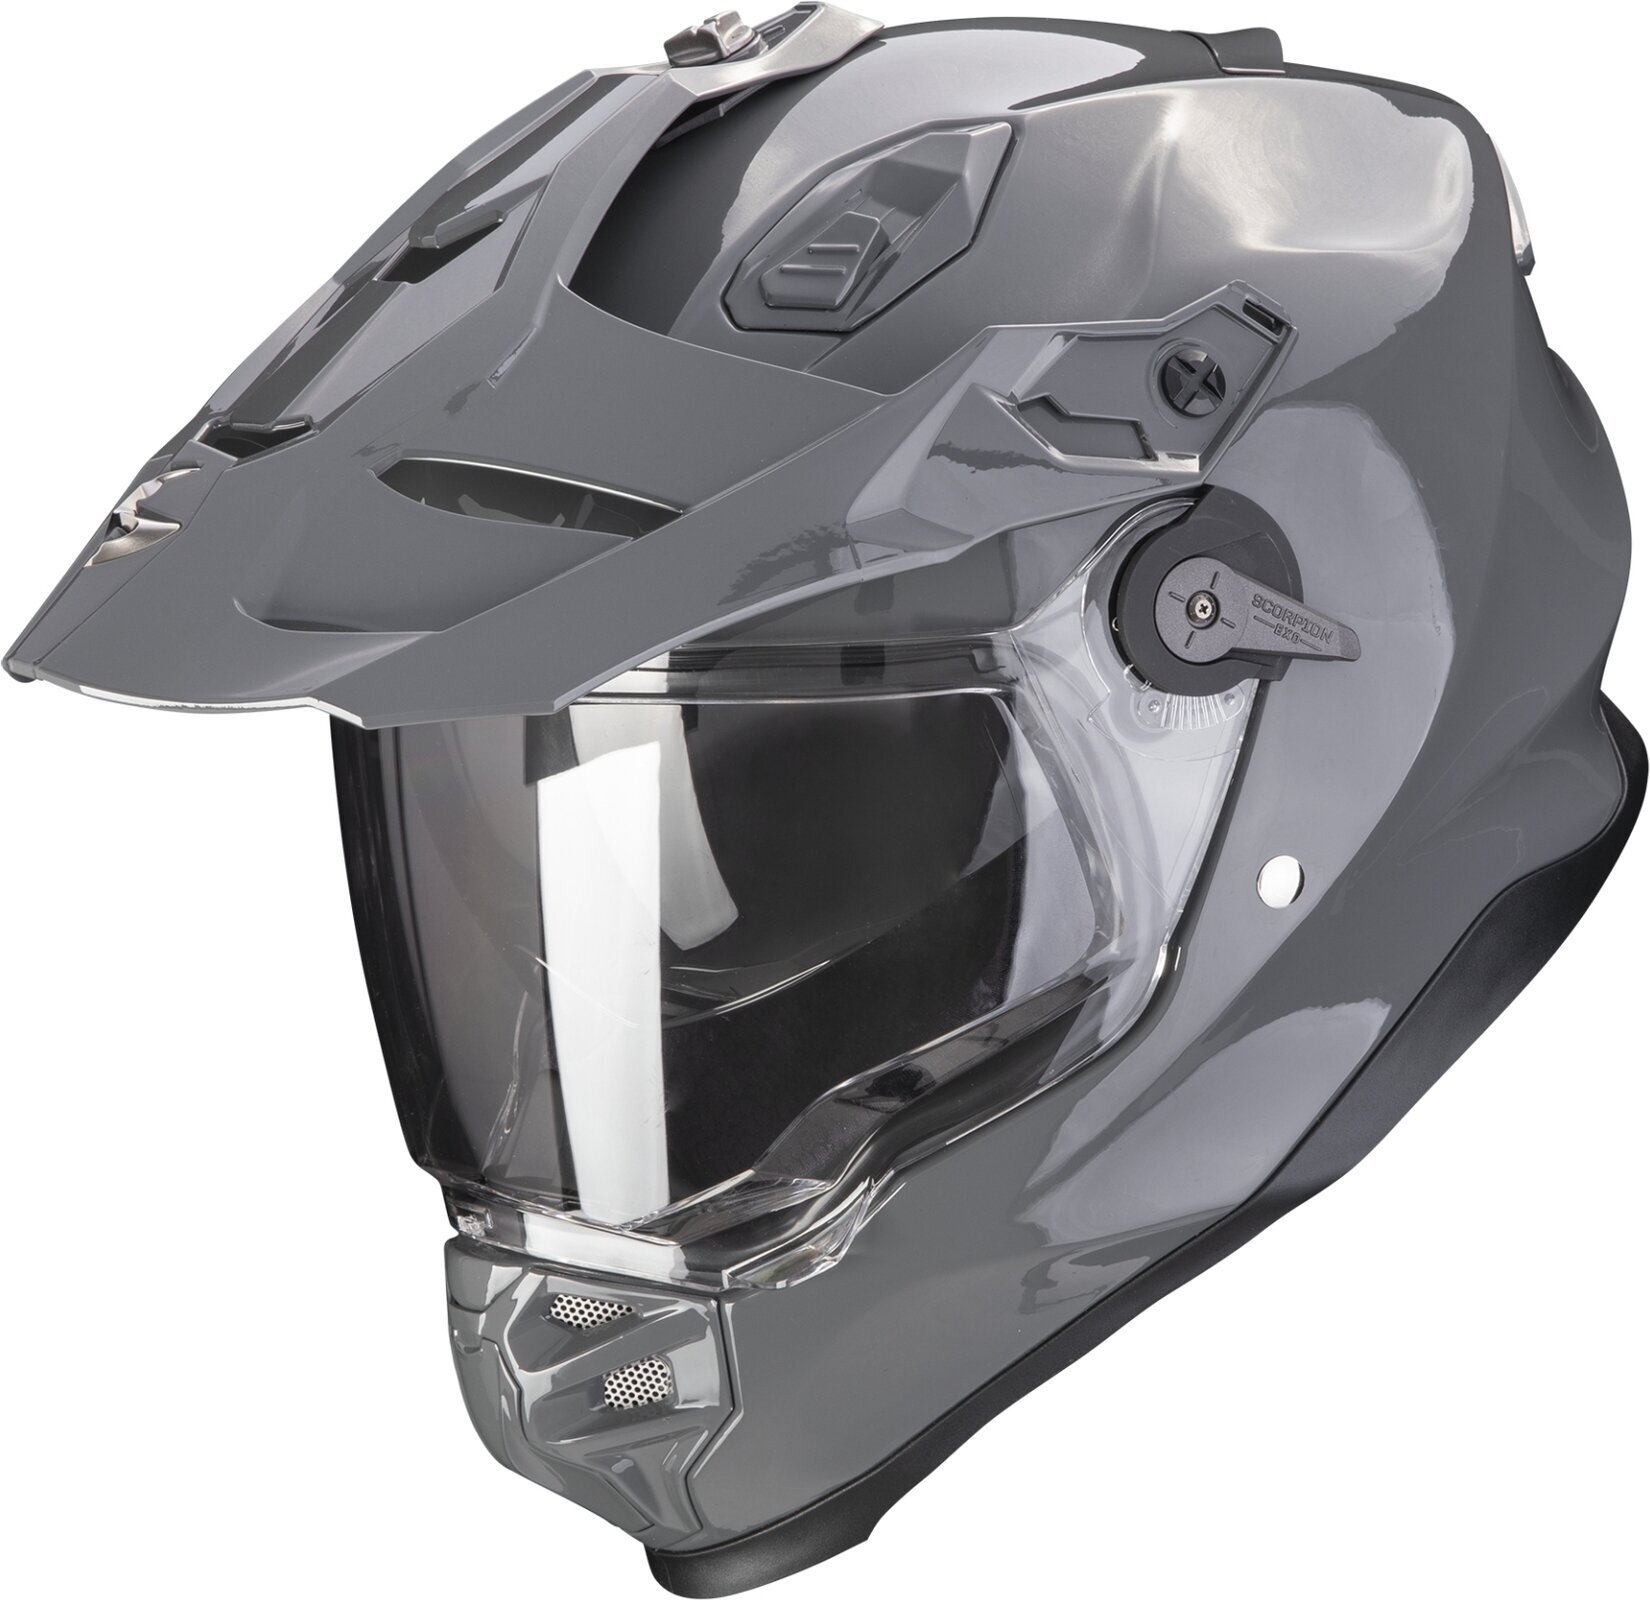 Helm Scorpion ADF-9000 AIR SOLID Cement Grey XS Helm